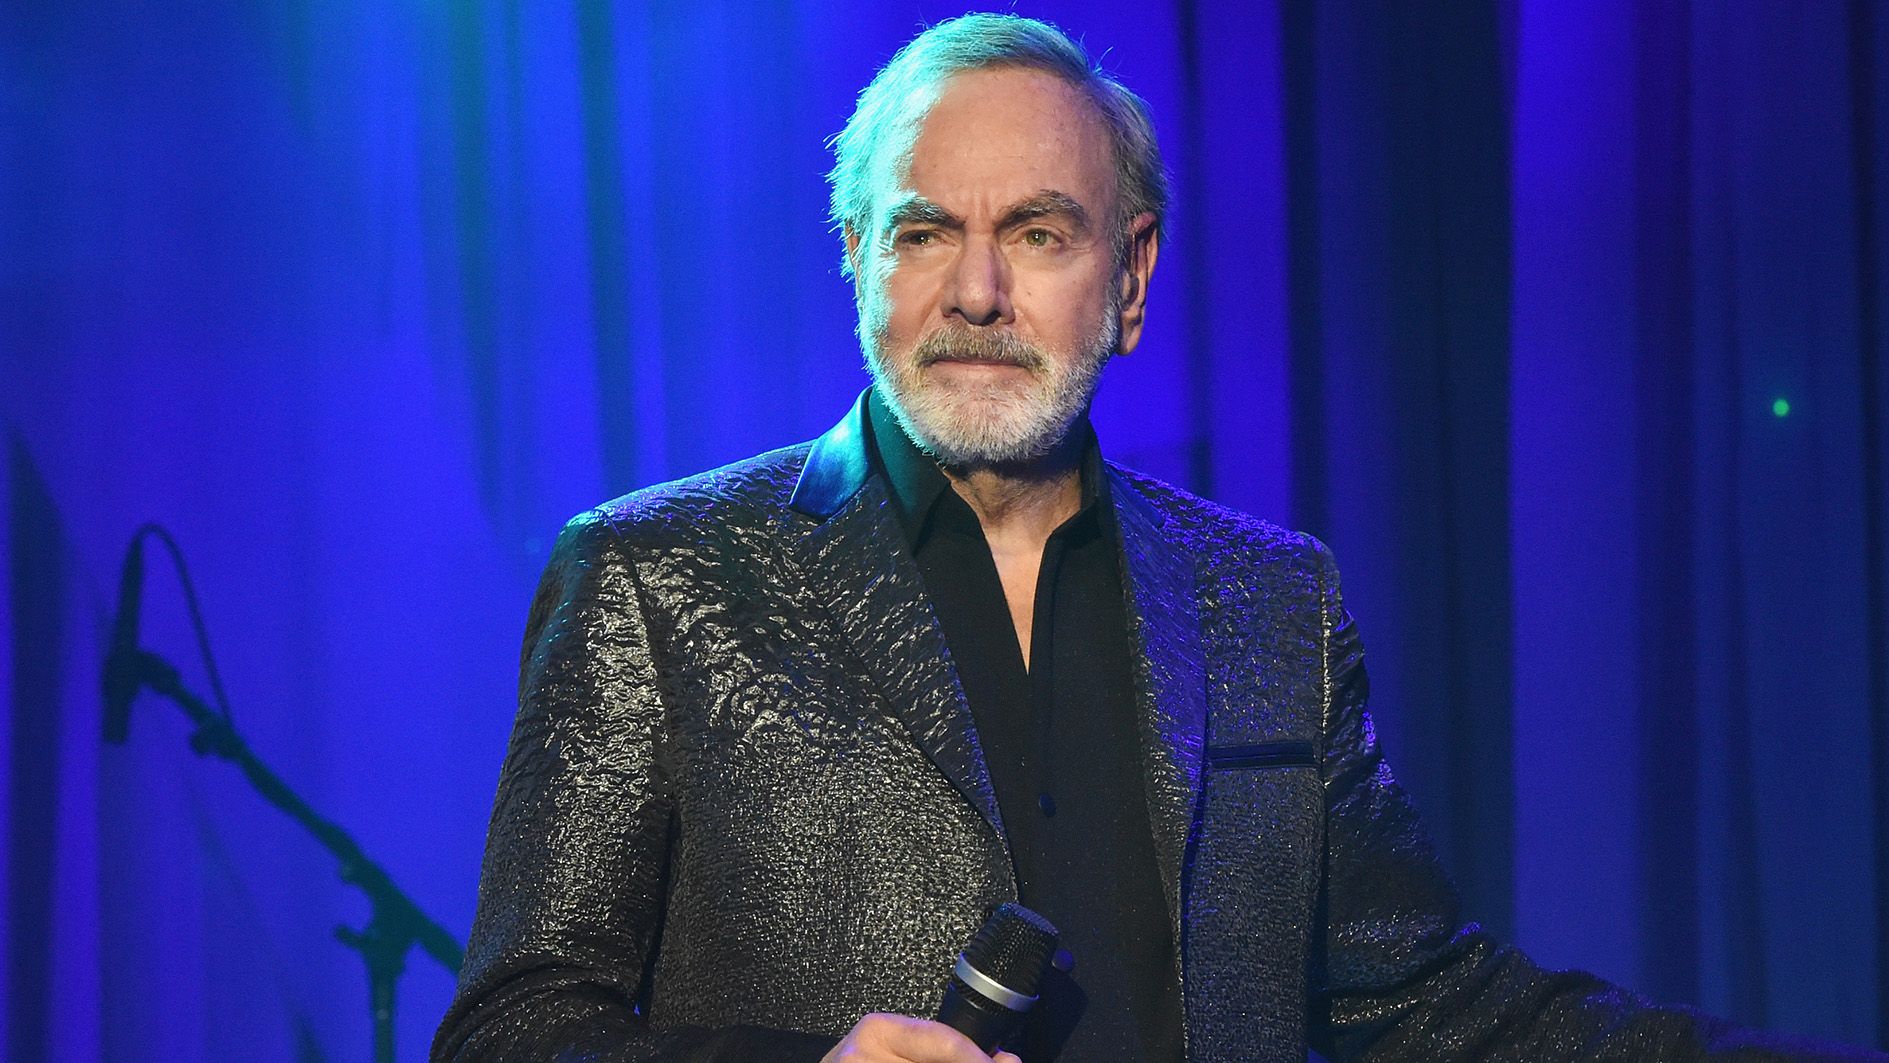 BREAKING: Neil Diamond releases Deluxe edition of ’12 songs’